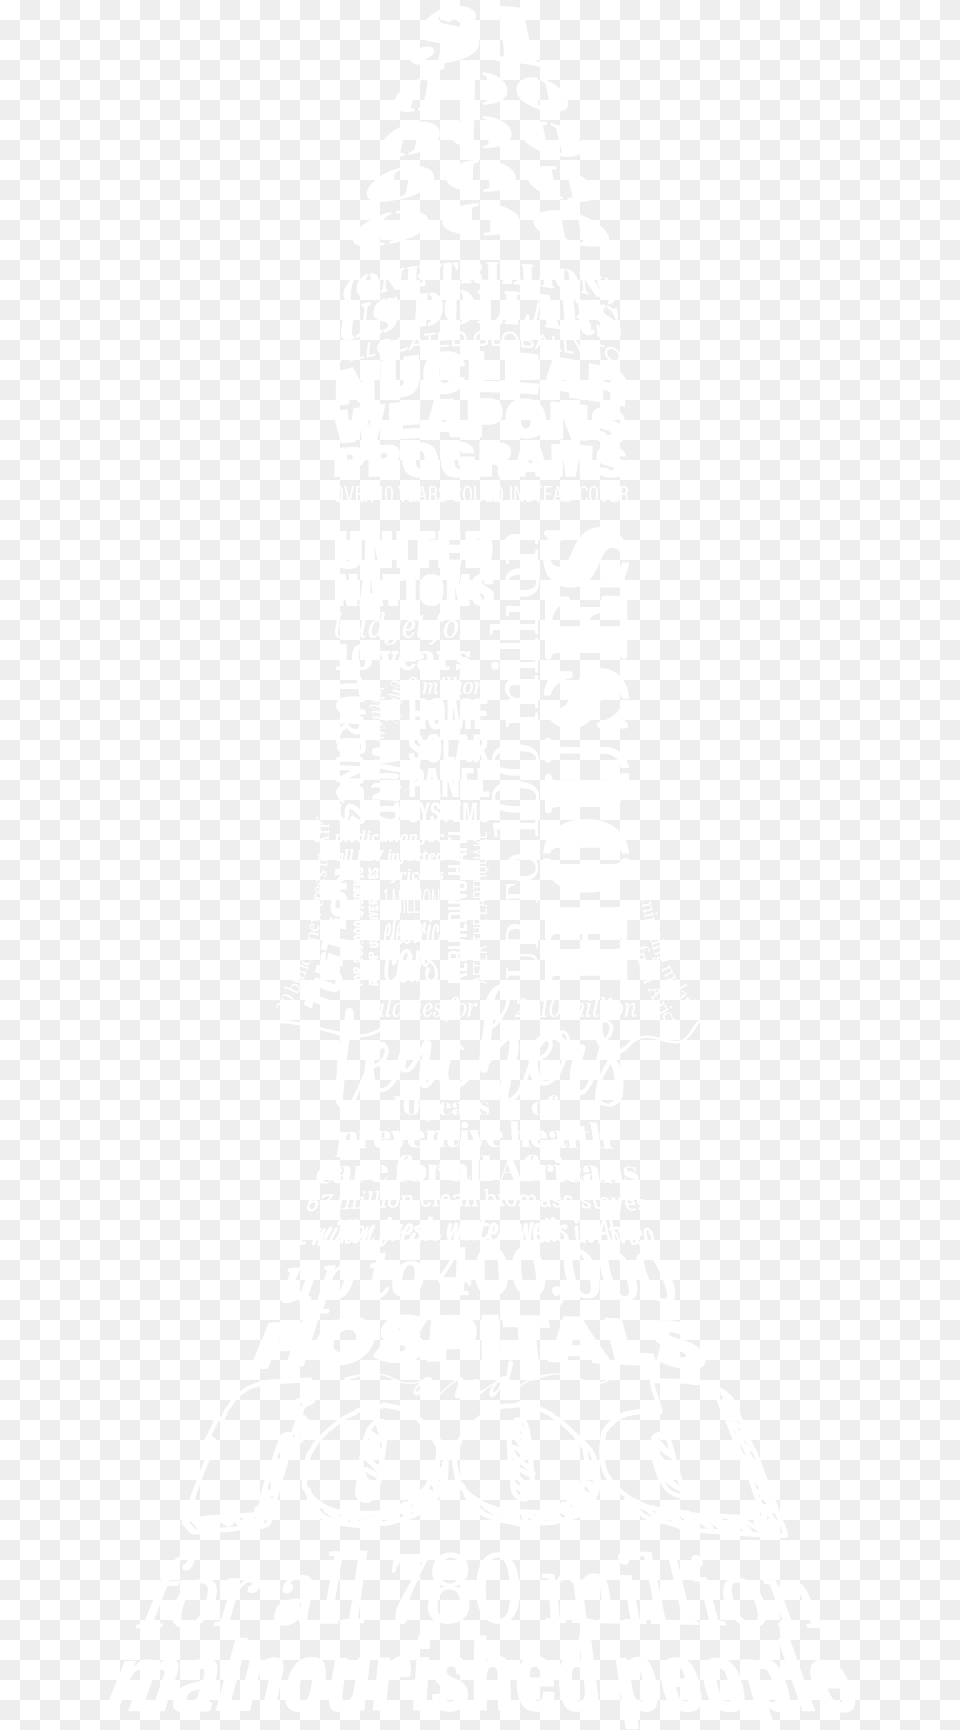 Download Missile Word Art In Fiasco Friend Of The People, Cutlery Png